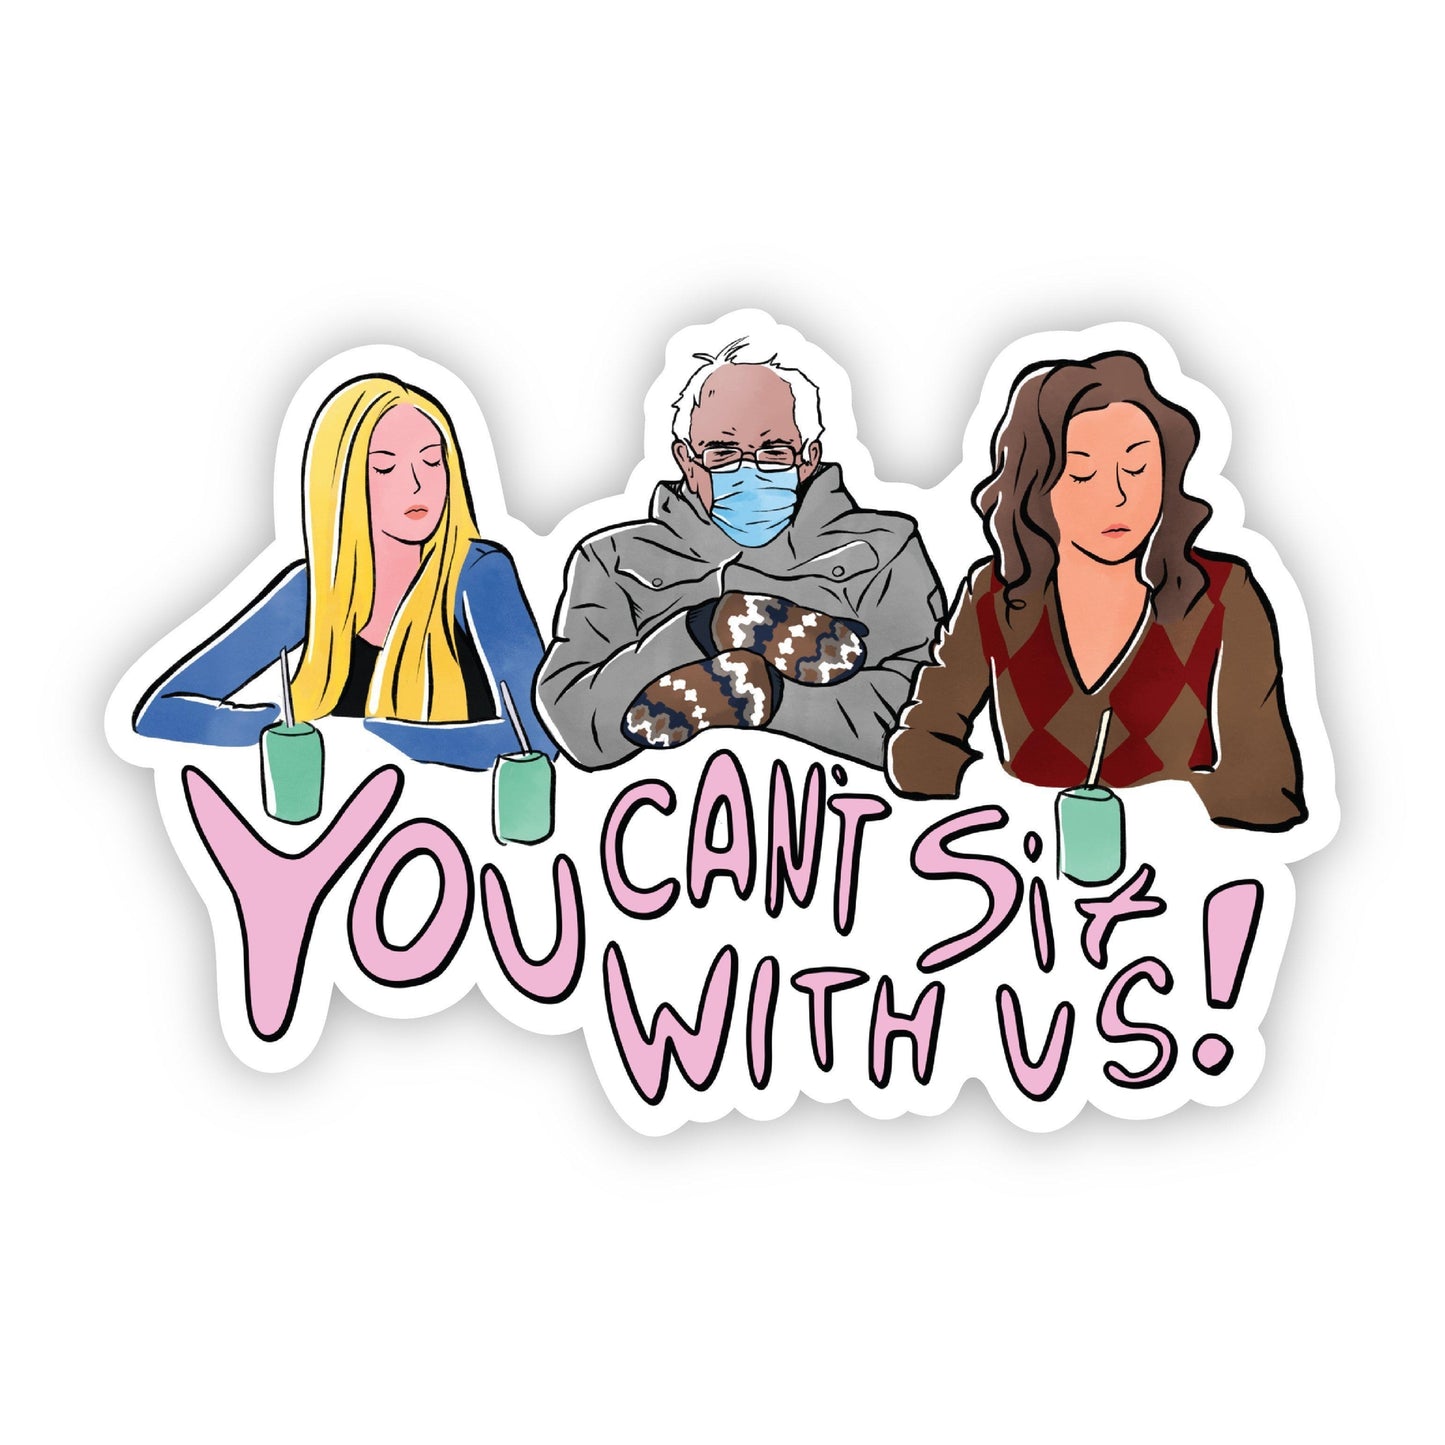 "You Can't Sit With Us" Mean Girls Bernie Sanders - Vinyl Decal Sticker - Mellow Monkey